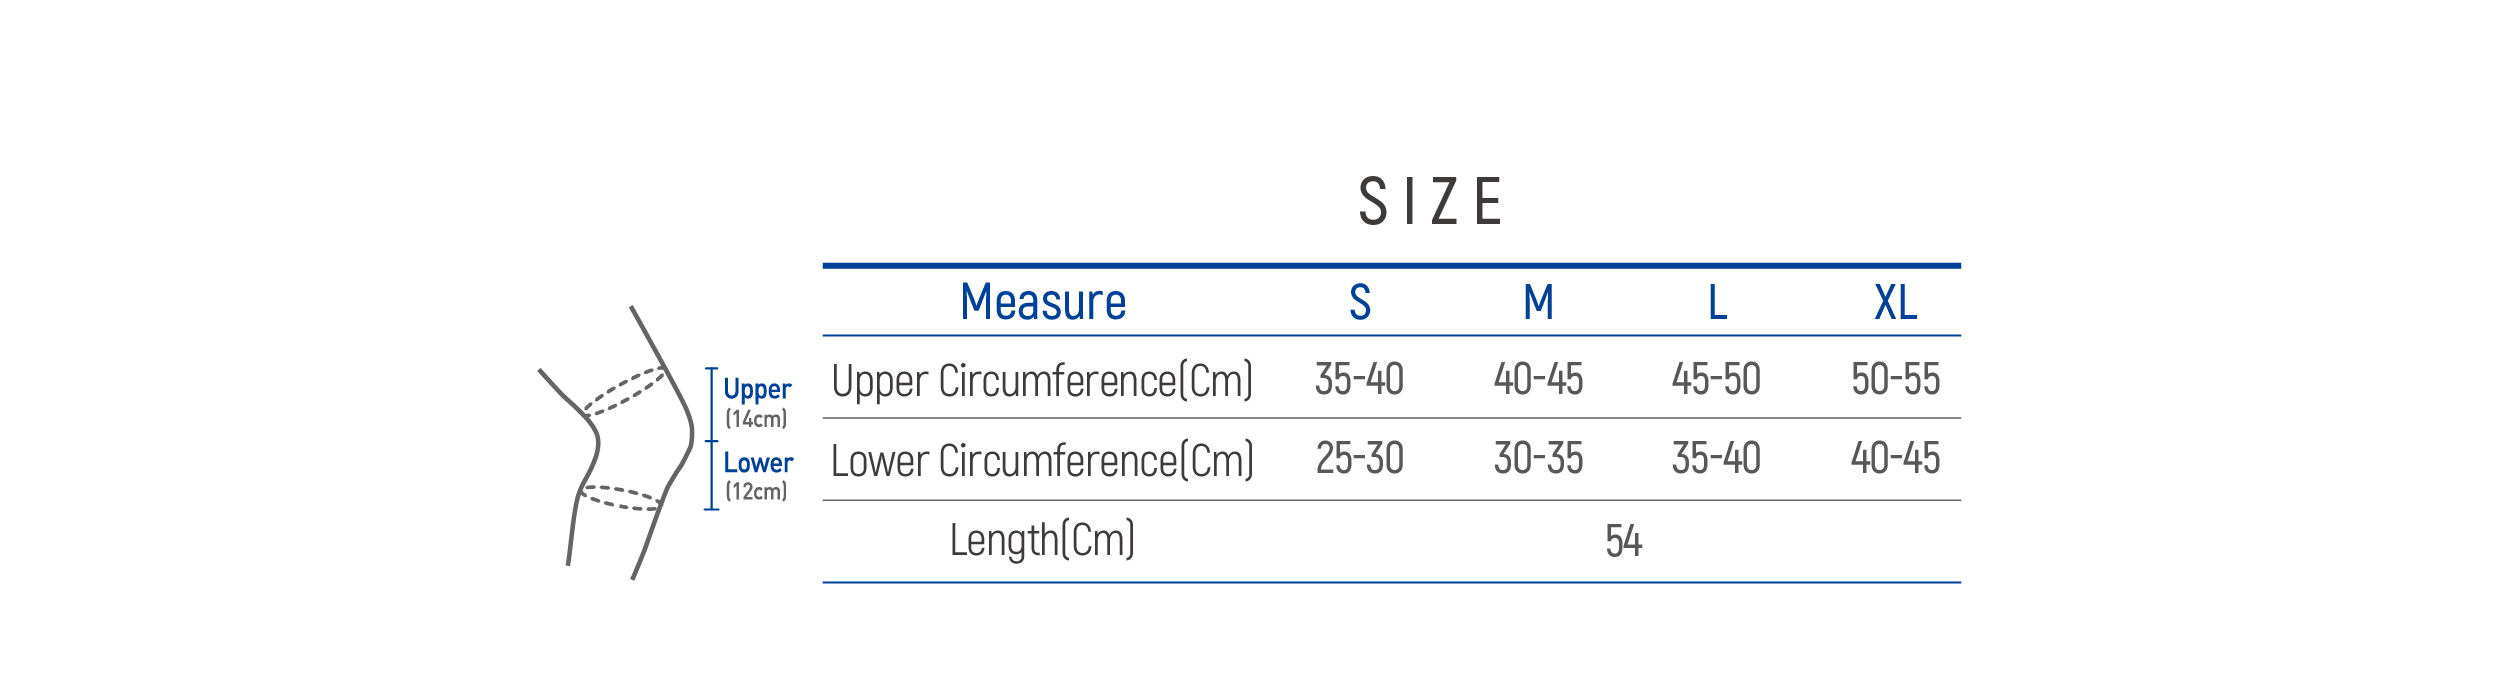 DR-K106 Size table image